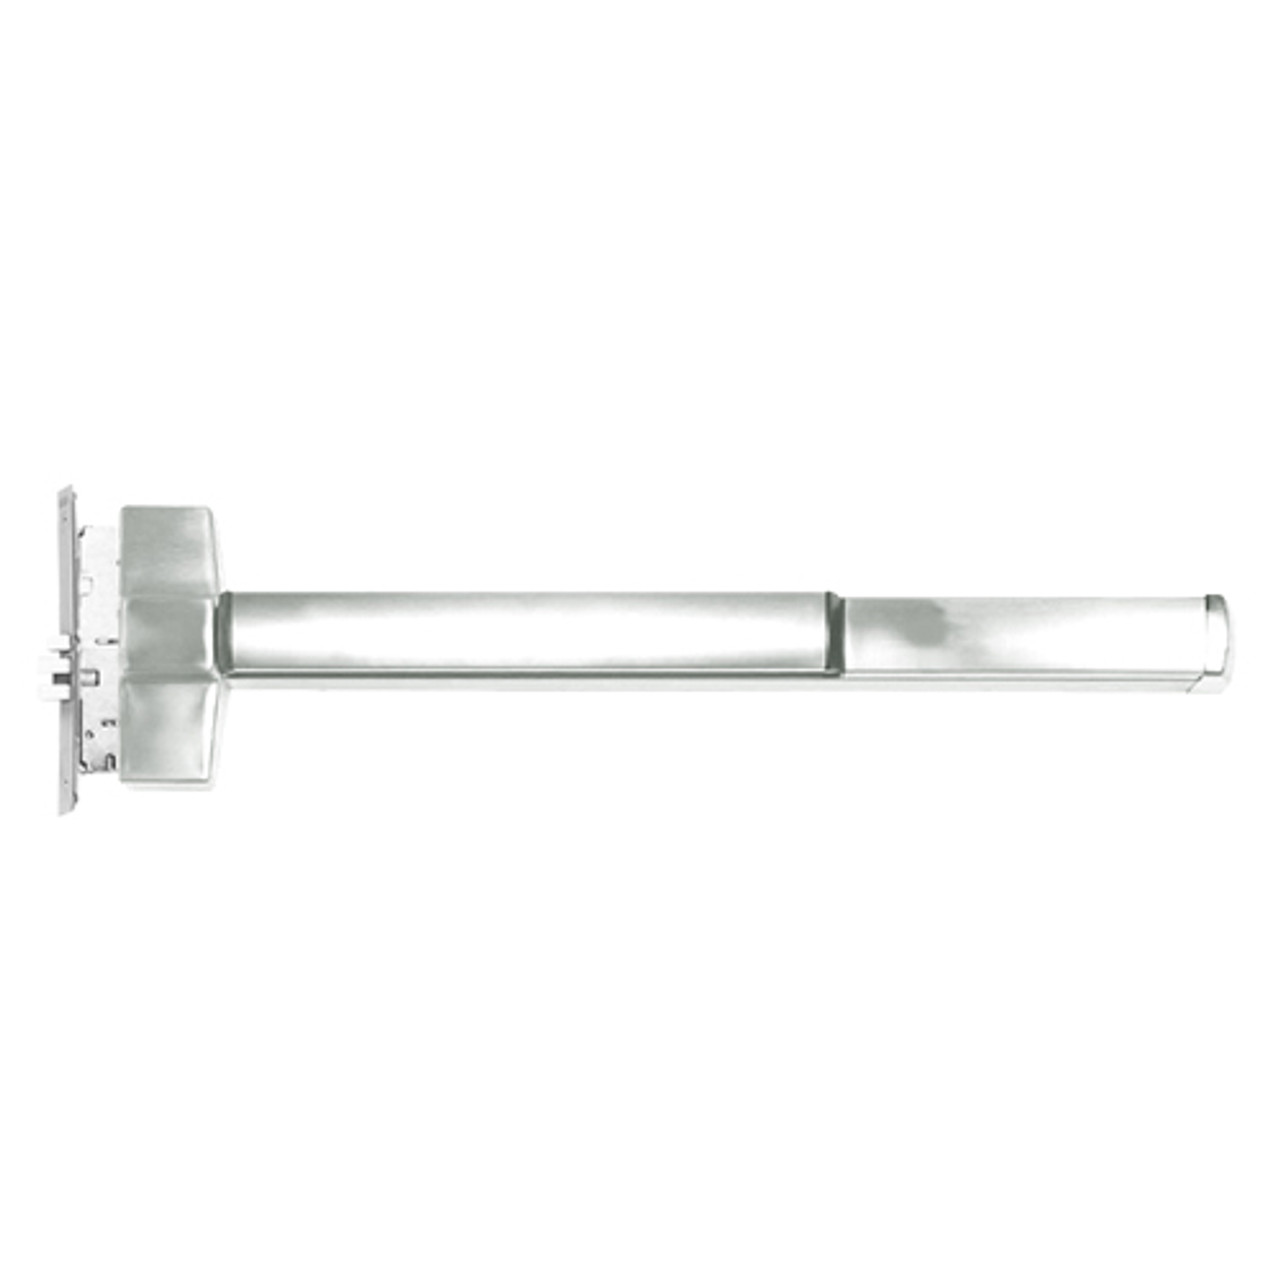 ED5600ATD-618-W048-RHR Corbin ED5600 Series Fire Rated Mortise Exit Device with Delayed Egress in Bright Nickel Finish